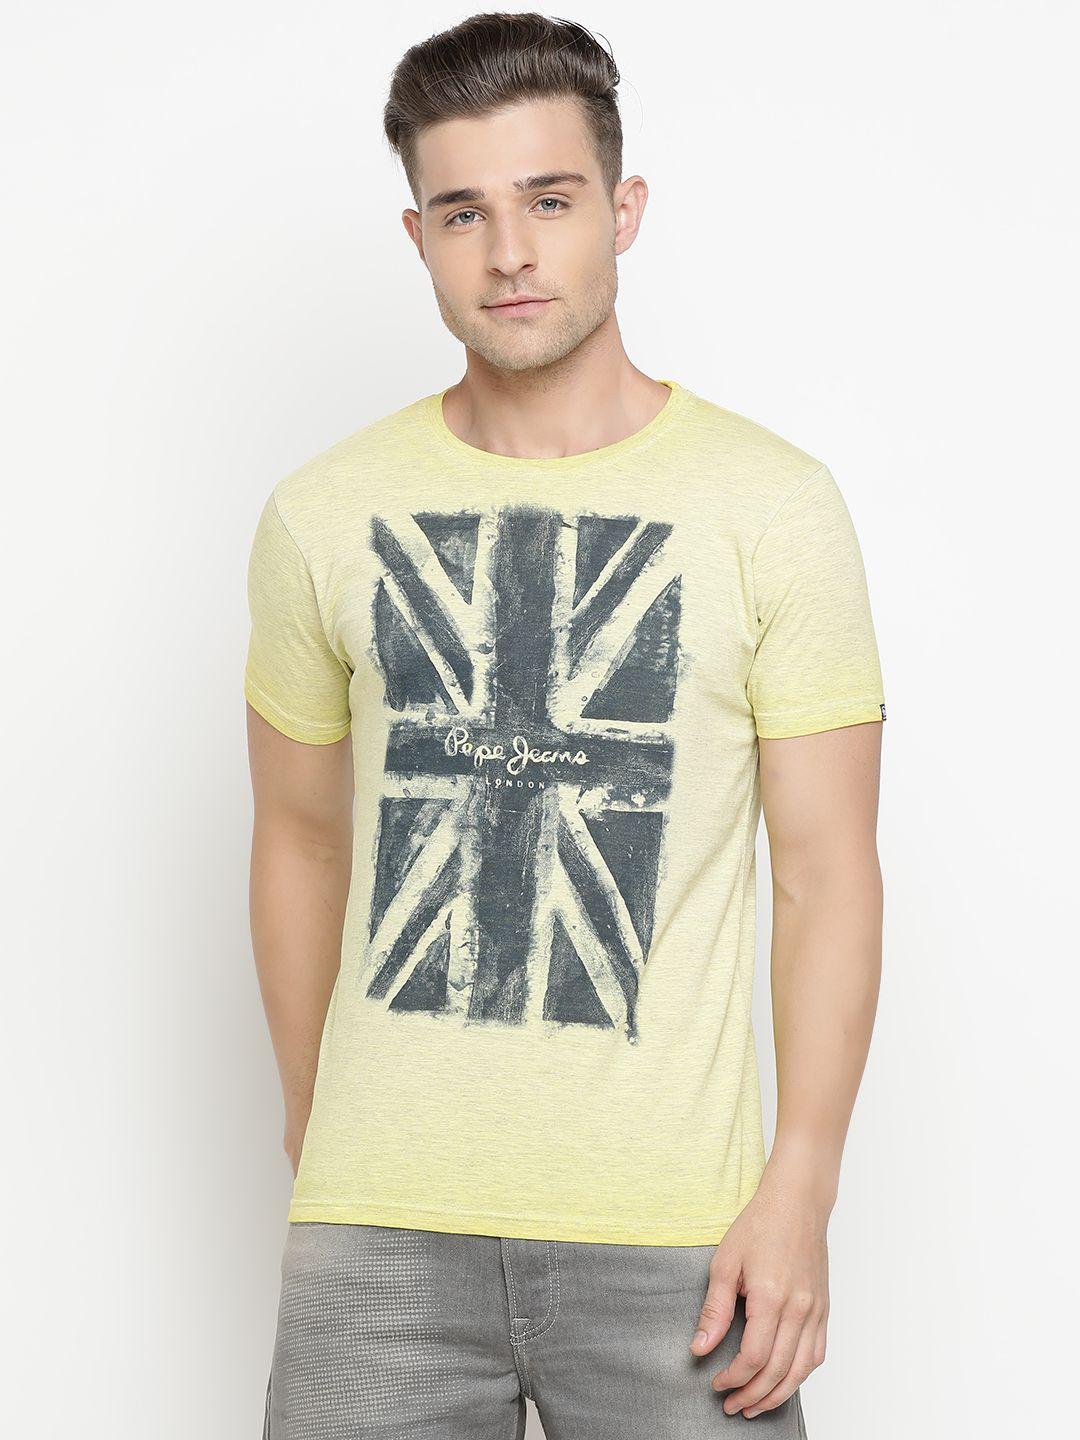 Pepe Jeans Men Yellow & Charcoal Grey Printed Round Neck T-shirt